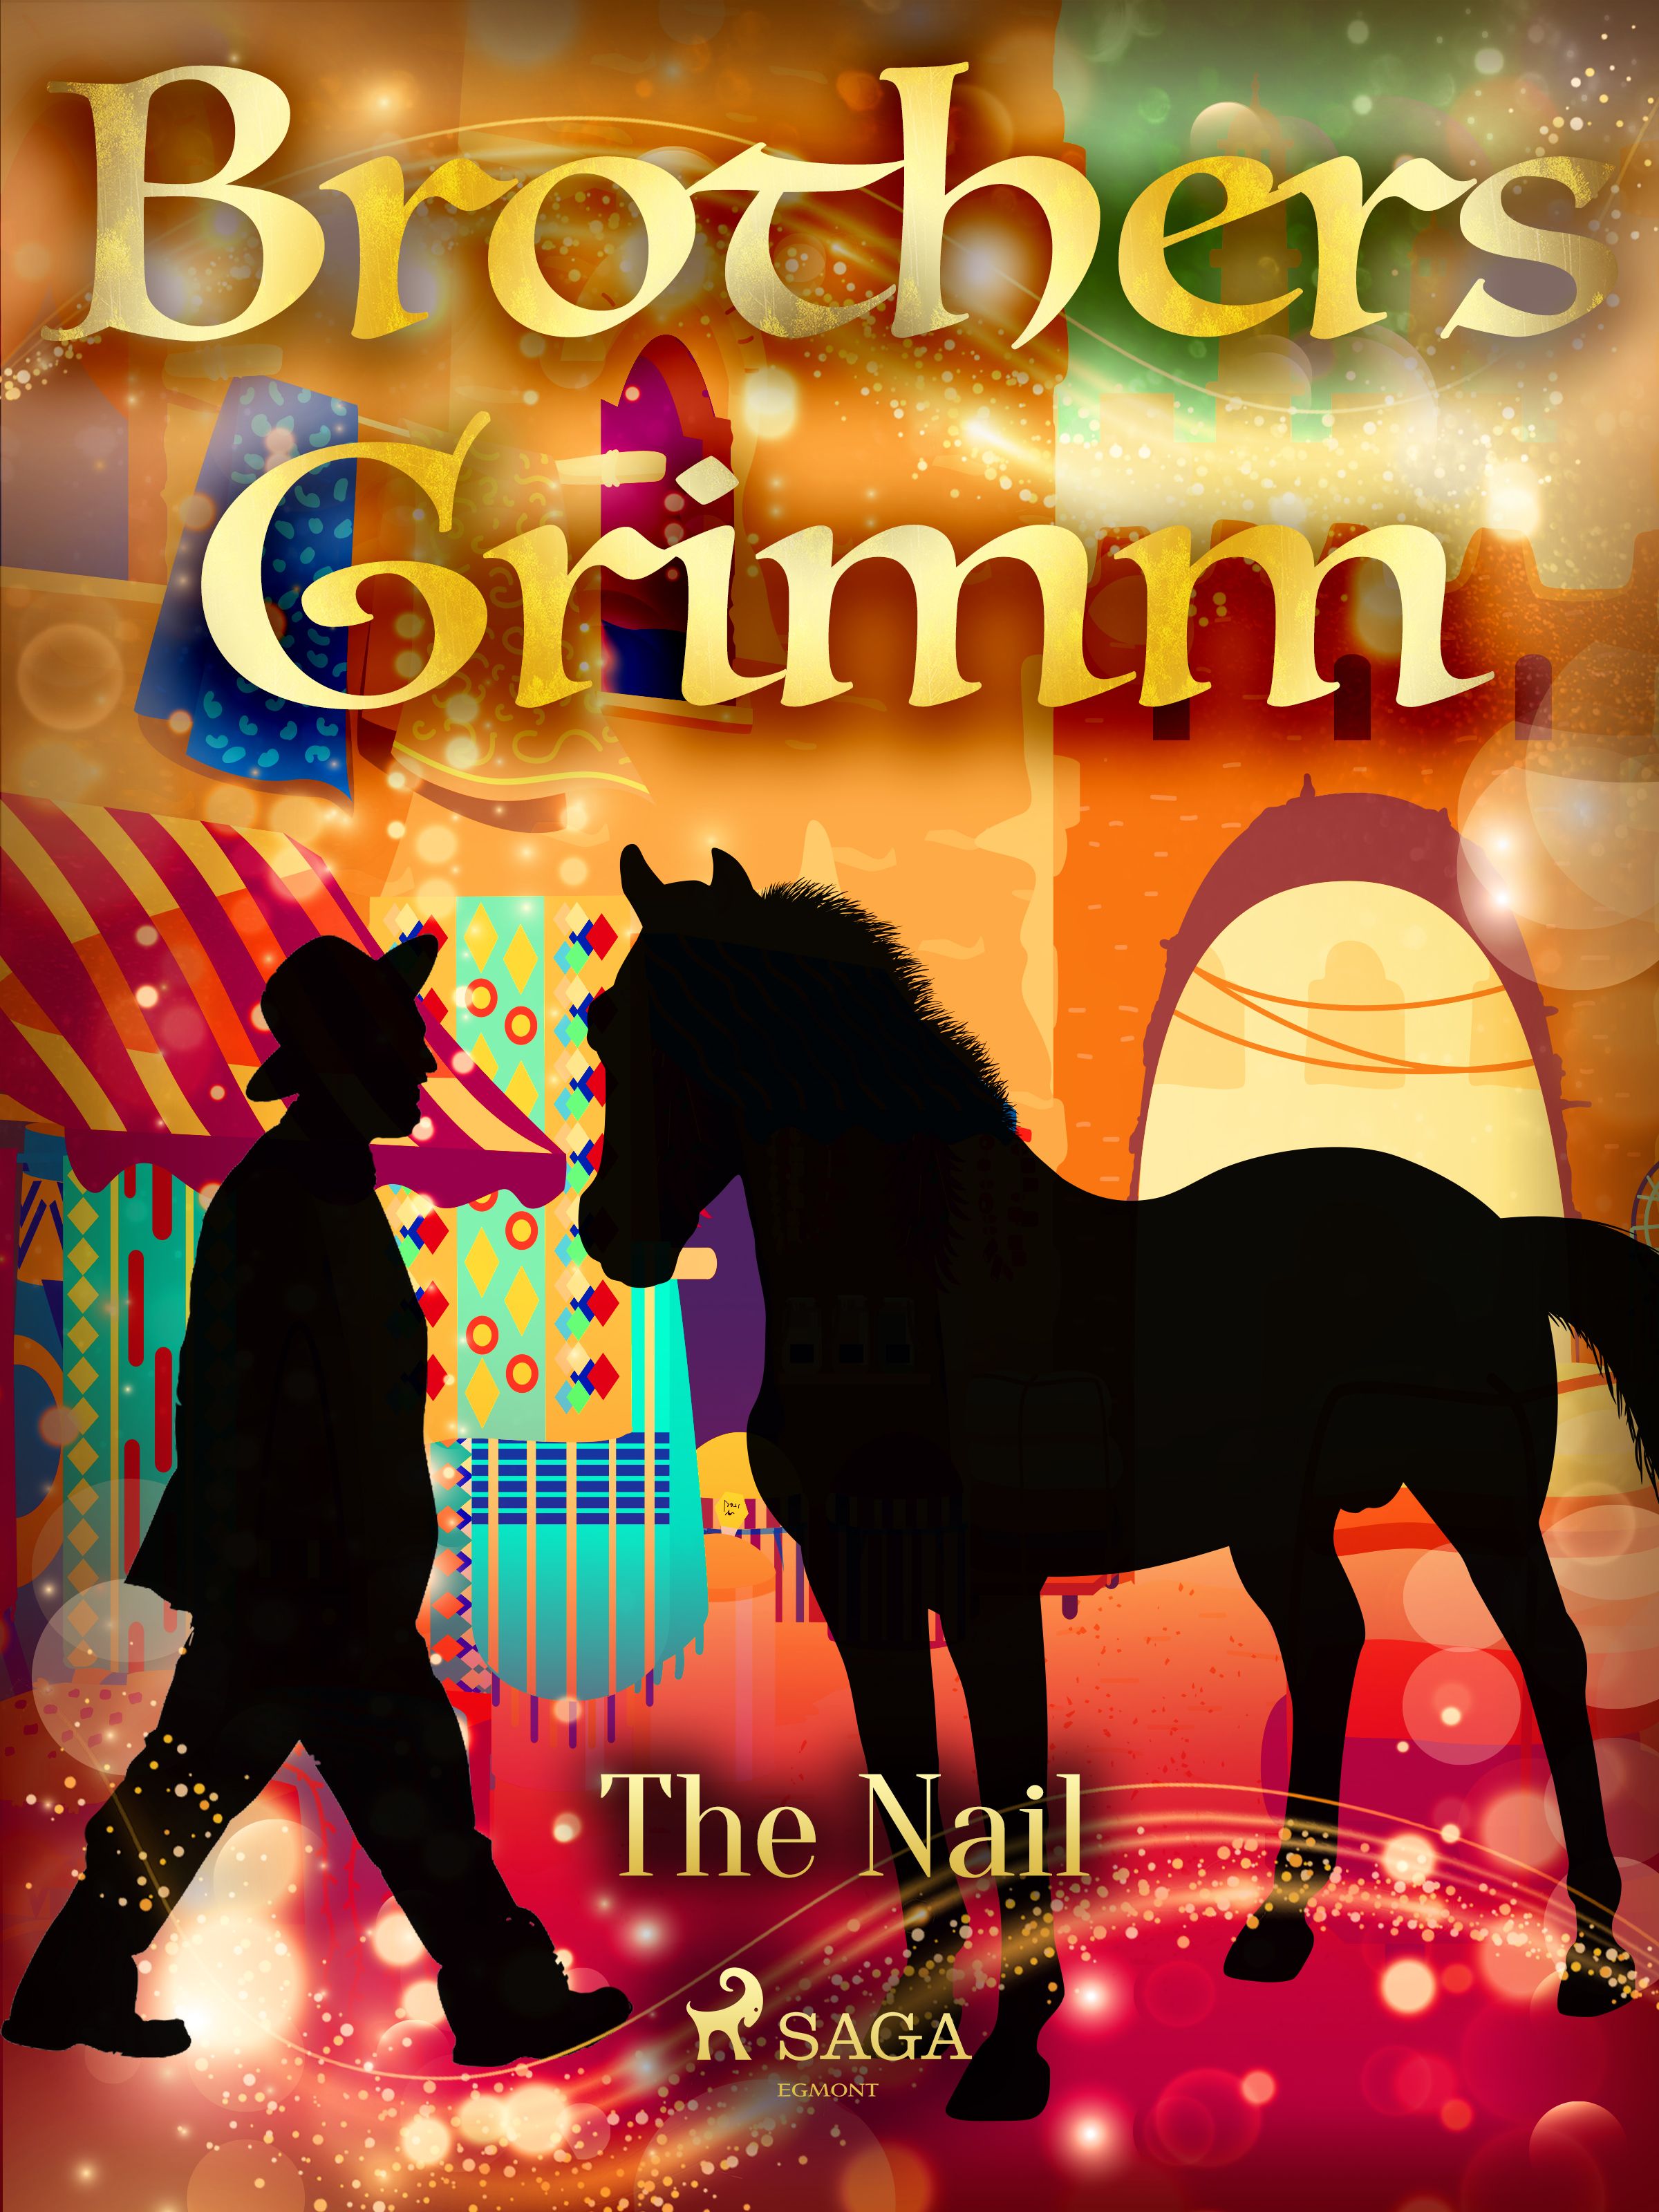 The Nail, eBook by Brothers Grimm